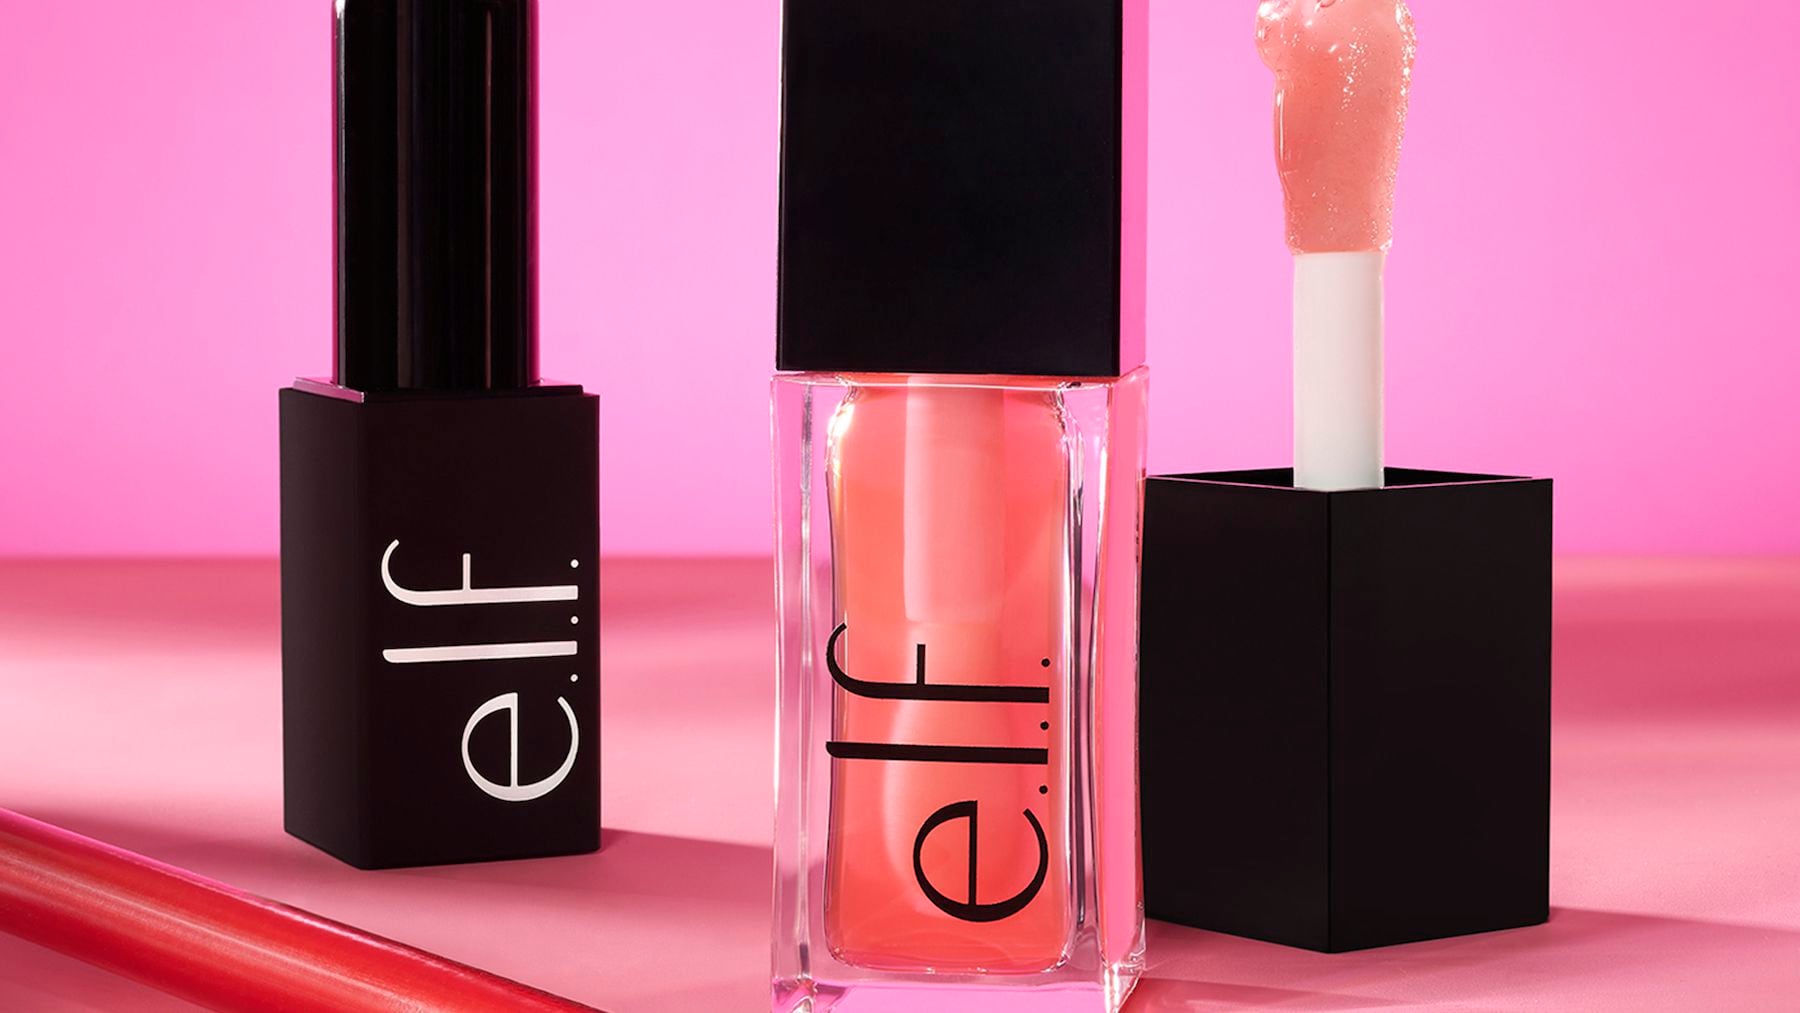 E.l.f. Beauty Reports 85 Percent Sales Growth and Raises Outlook